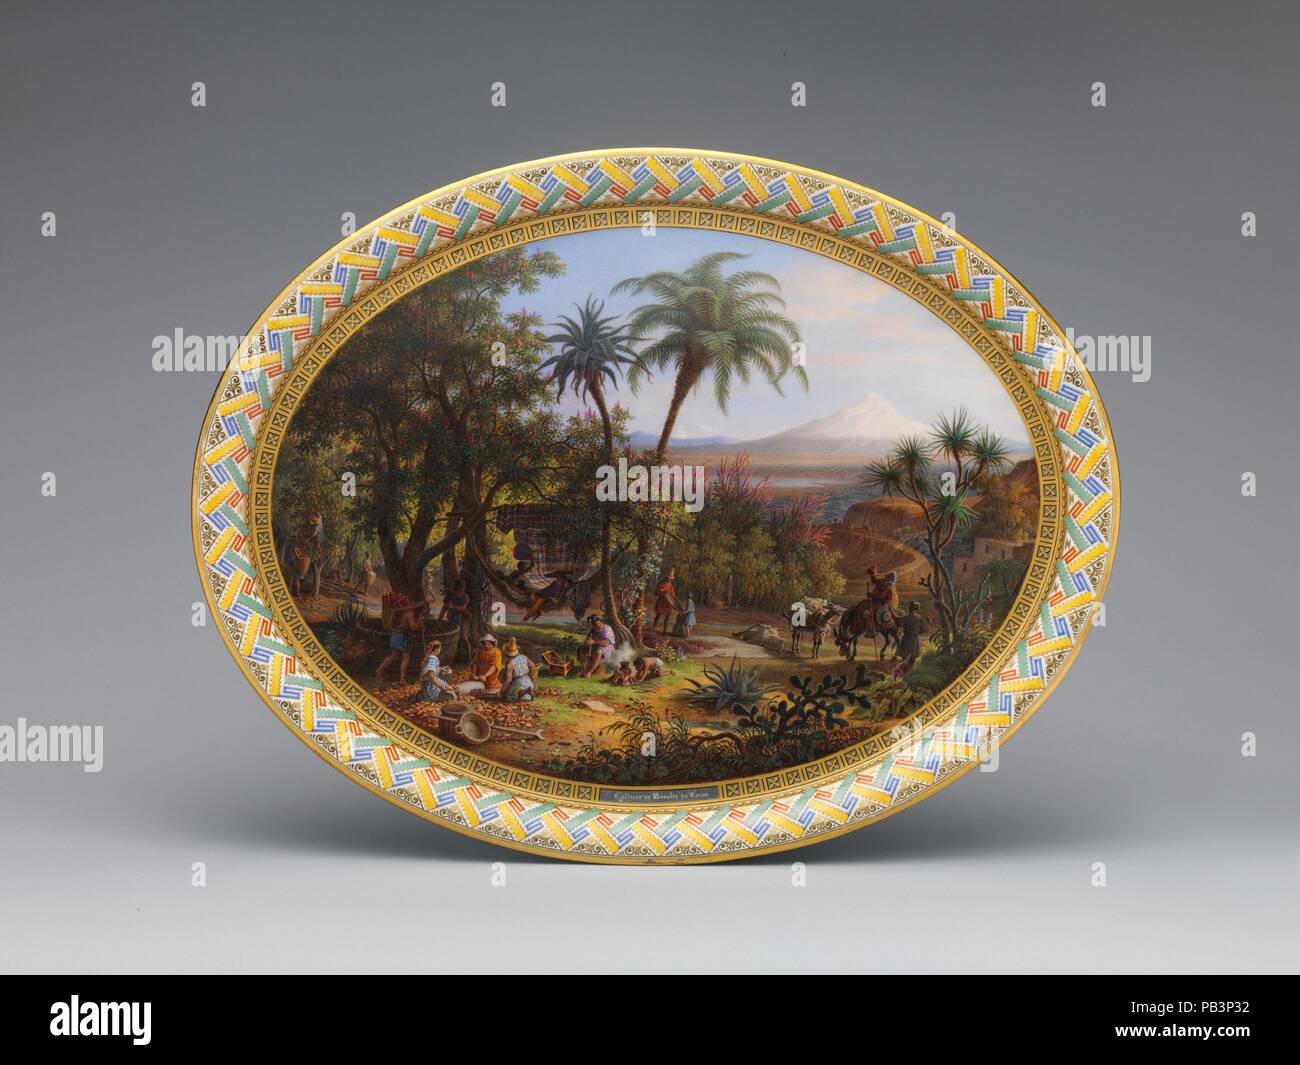 Tray. Culture: French, Sèvres. Decorator: Pictorial decoration by Jean Charles Develly (active 1813-47); Gilded by Pierre Riton (active 1821-60). Dimensions: Overall (confirmed): 3/4 x 17 3/4 x 13 11/16 in. (1.9 x 45.1 x 34.8 cm). Factory: Sèvres Manufactory (French, 1740-present). Patron: Commissioned by Louis Philippe, King of France (French, Paris 1773-1850 Claremont, Surrey) for Queen Marie-Amélie. Date: 1836.  The best of the Sèvres porcelain produced in the mid-nineteenth century displays an originality of conception unmatched by the other European ceramic manufactories of the period. Th Stock Photo